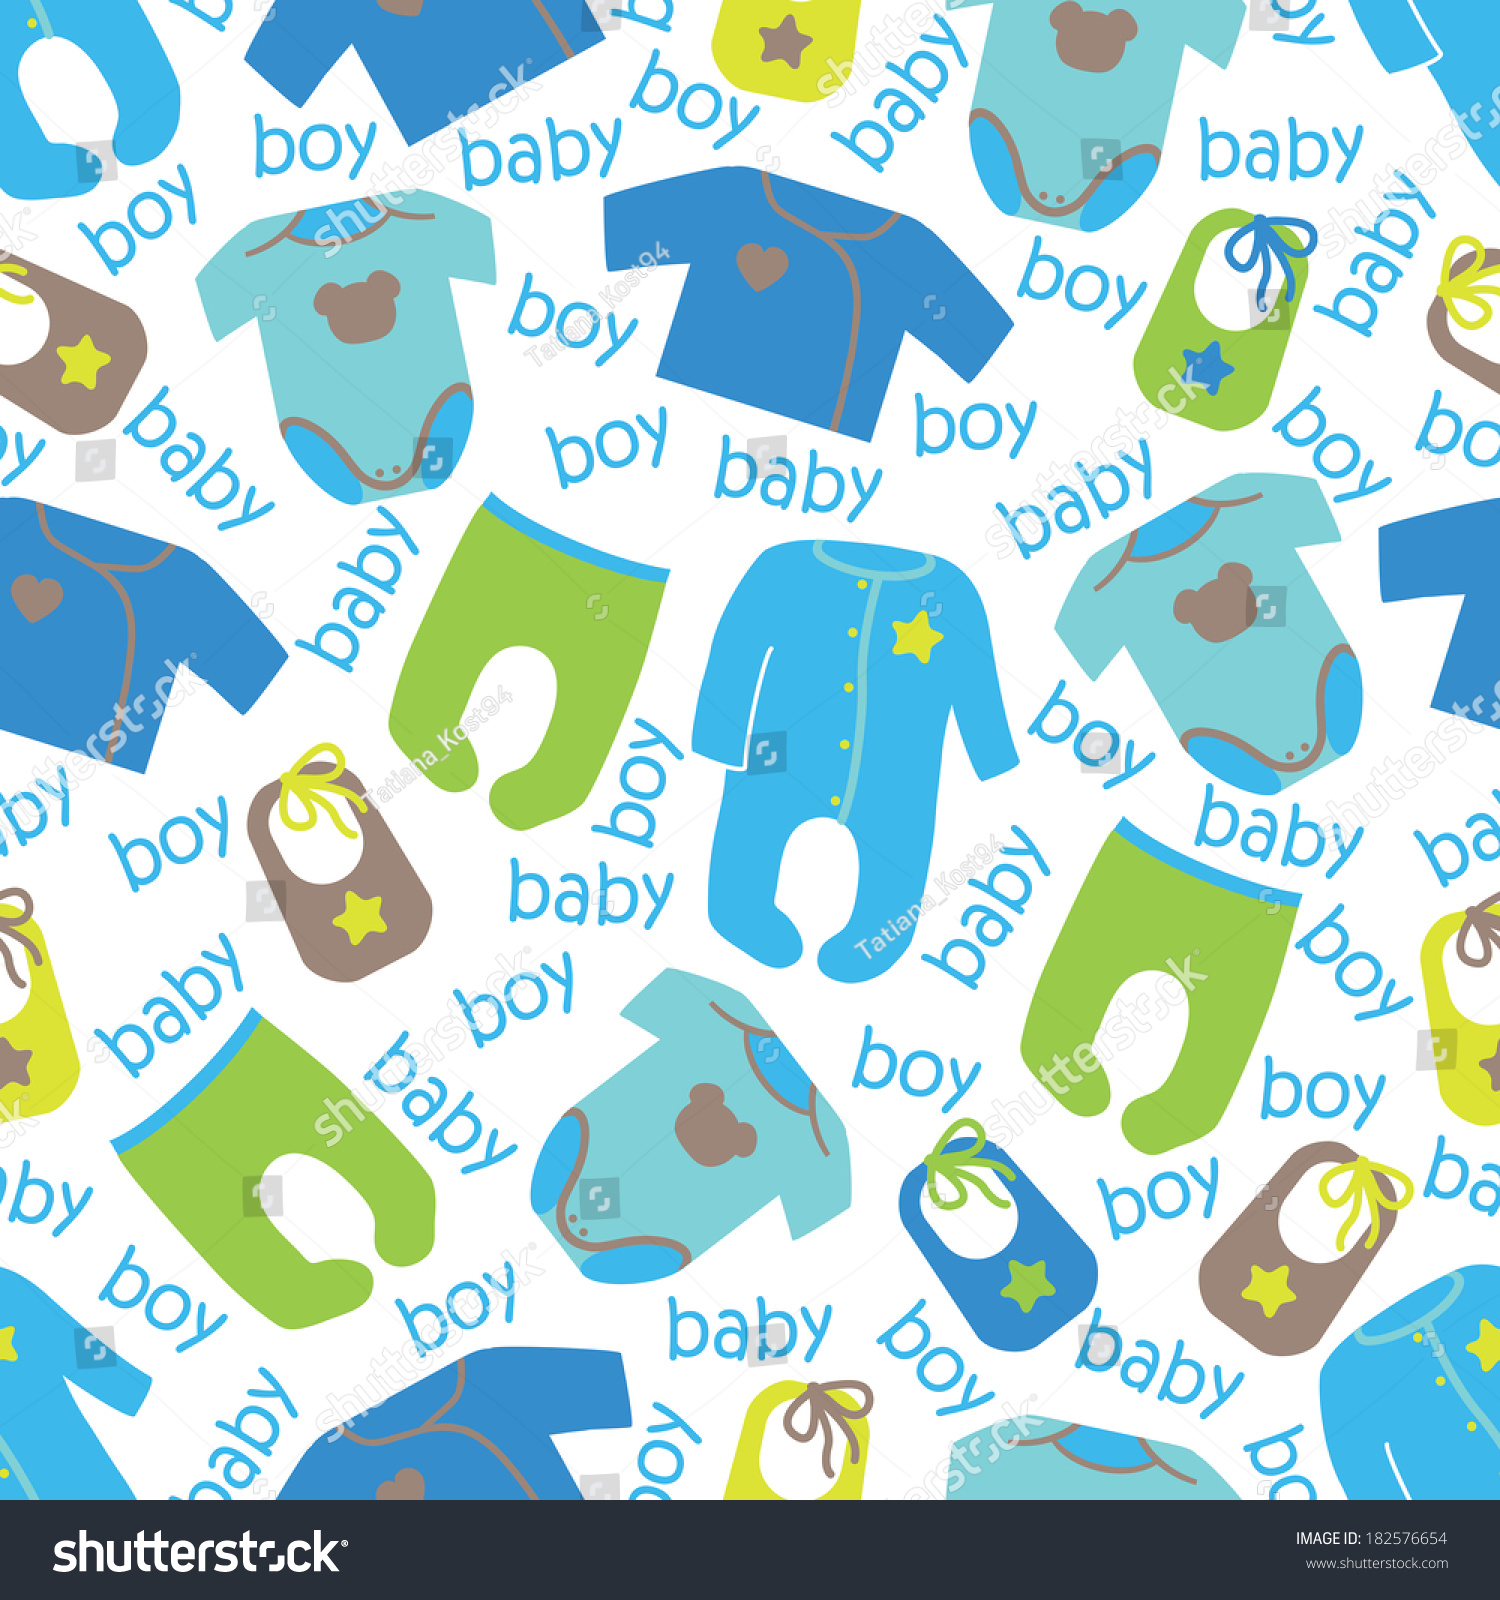 Colorful Clothes Newborn Baby Boy Seamless Stock Vector 182576654